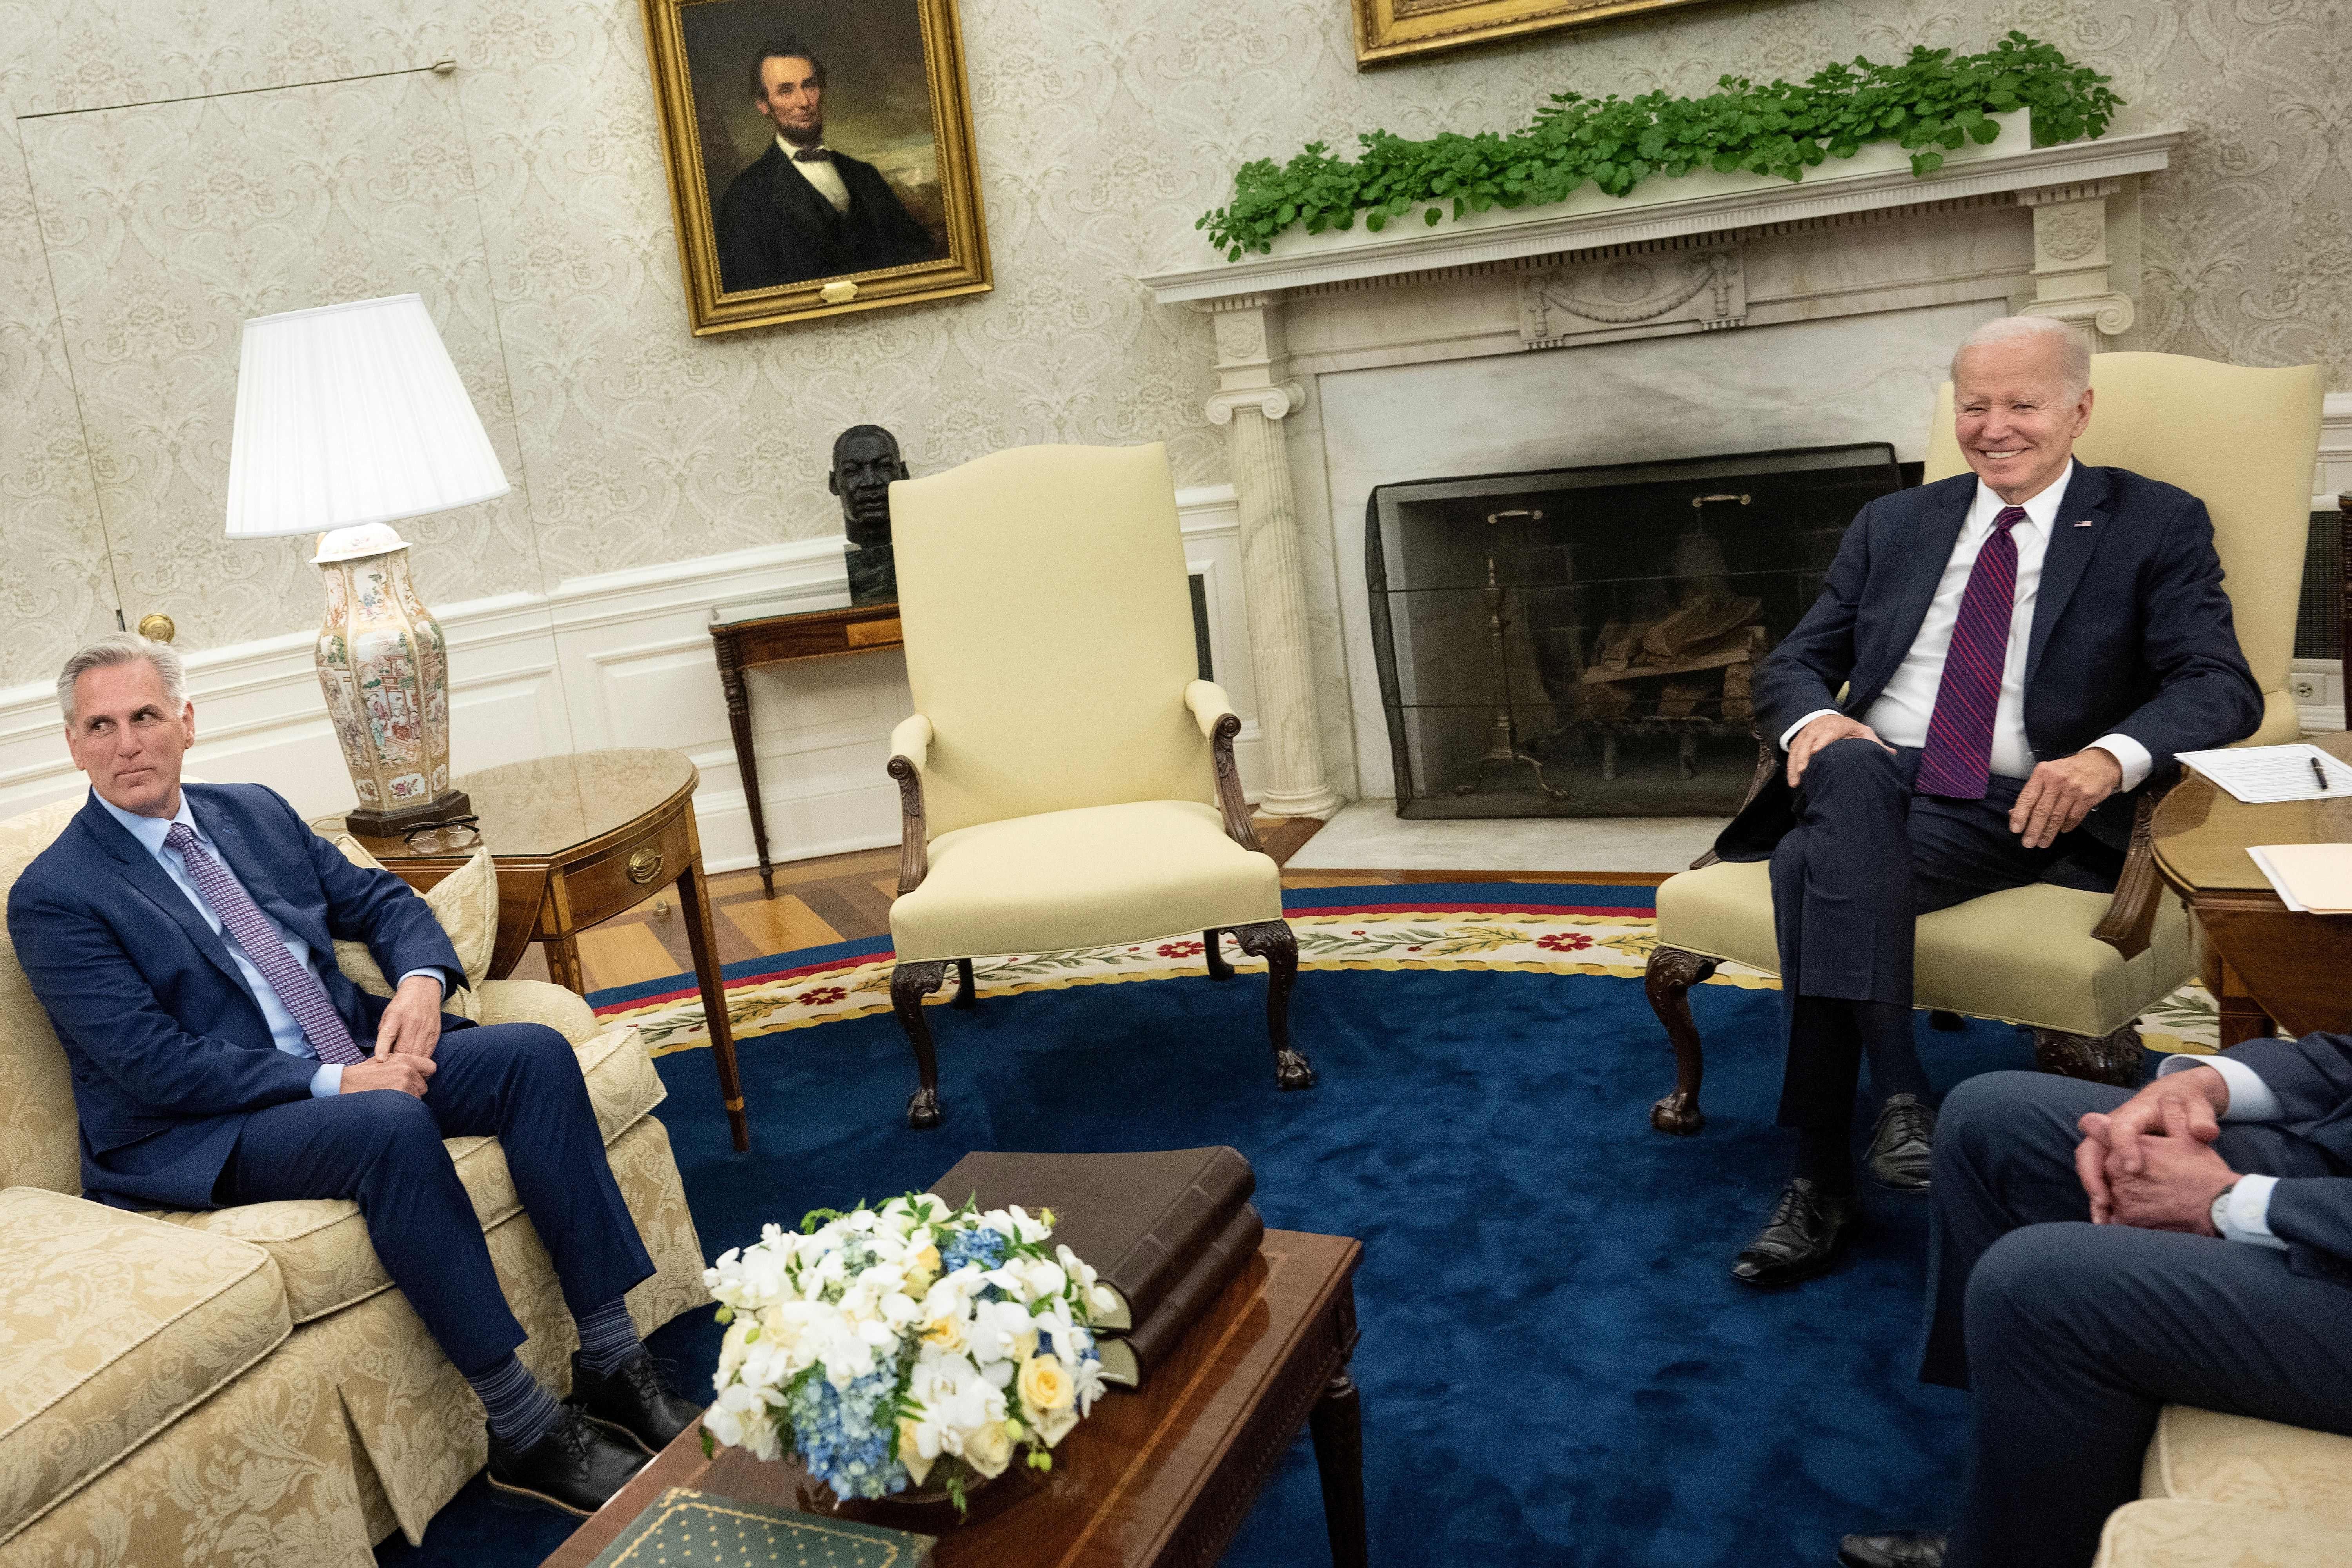 Biden and McCarthy sit down in the Oval Office.